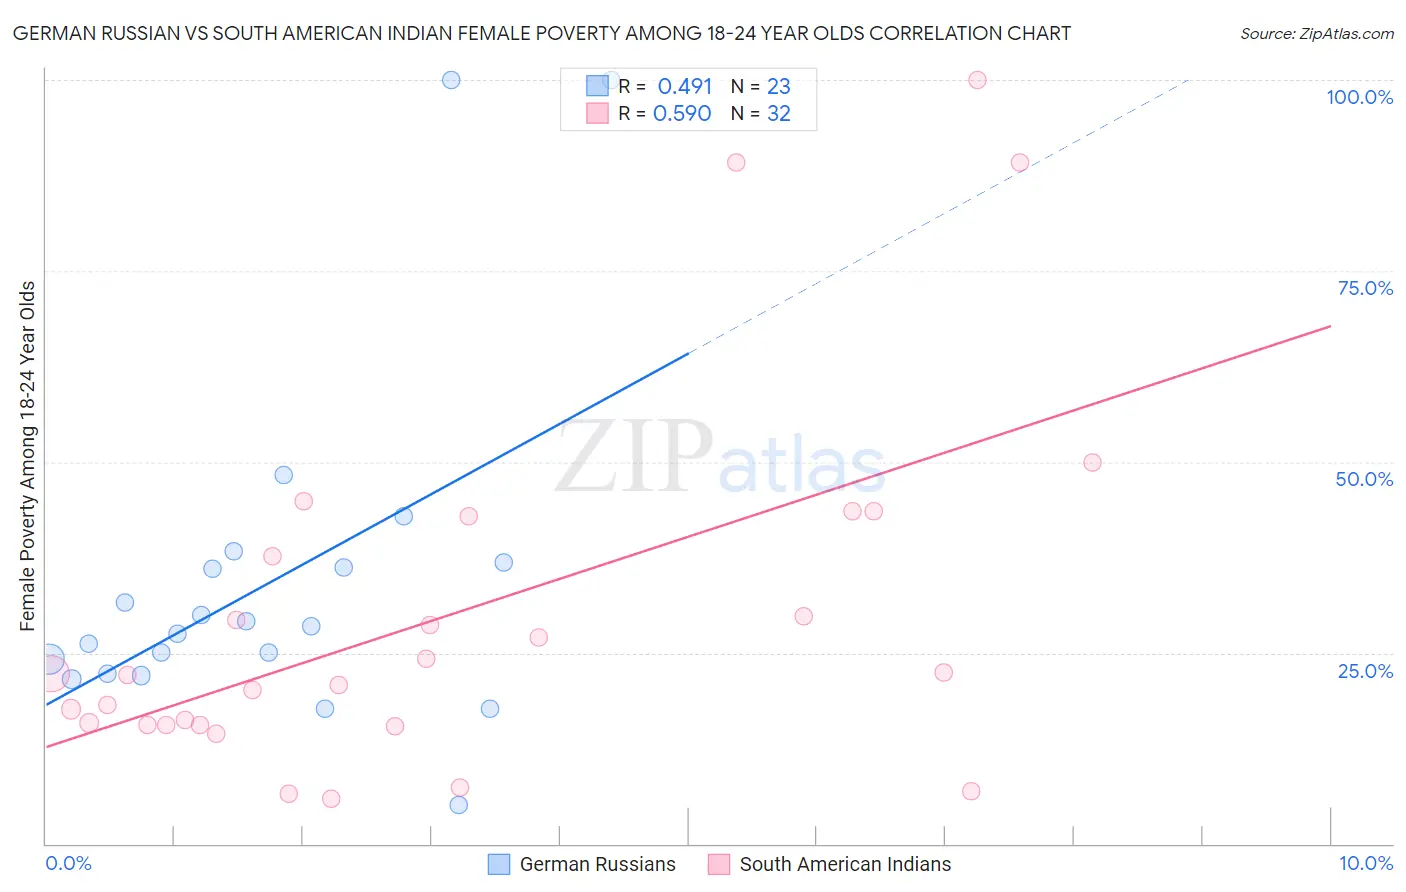 German Russian vs South American Indian Female Poverty Among 18-24 Year Olds